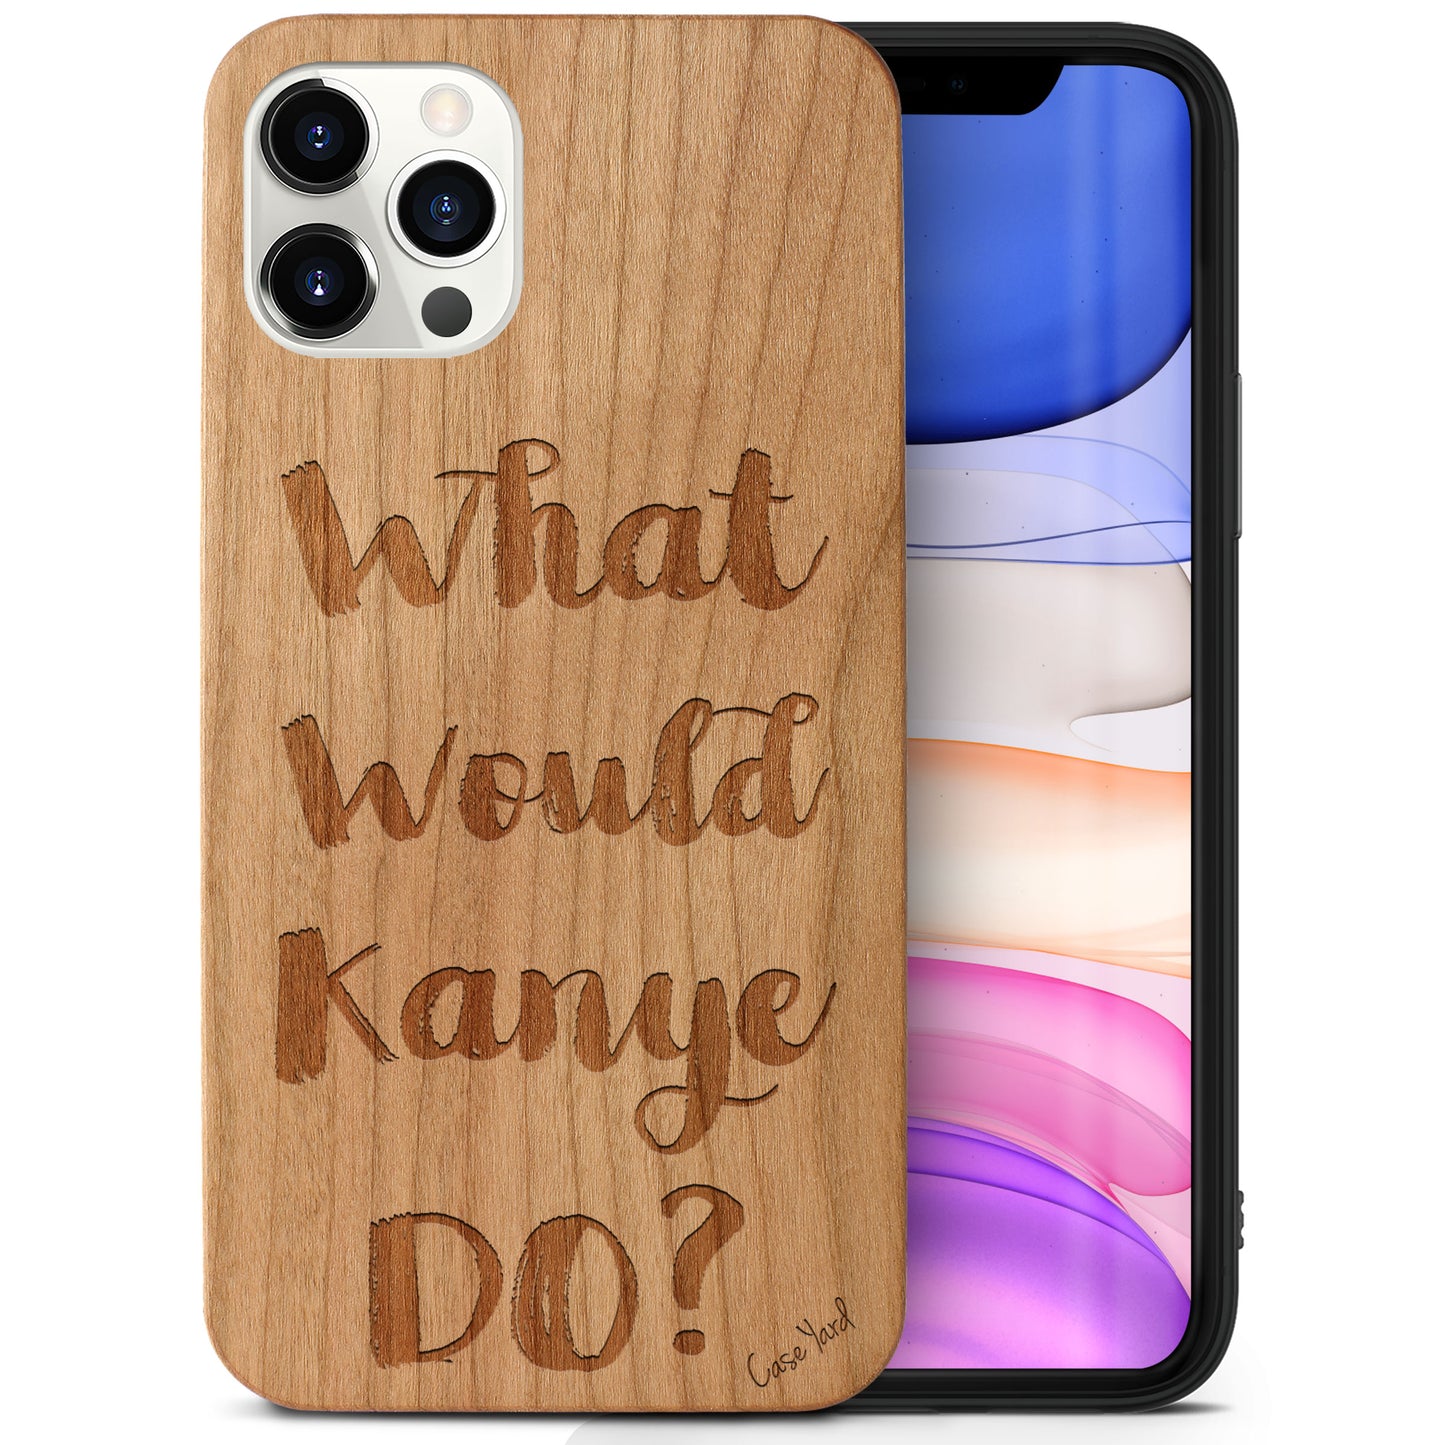 Wooden Cell Phone Case Cover, Laser Engraved case for iPhone & Samsung phone What Would Kanye Do? Design